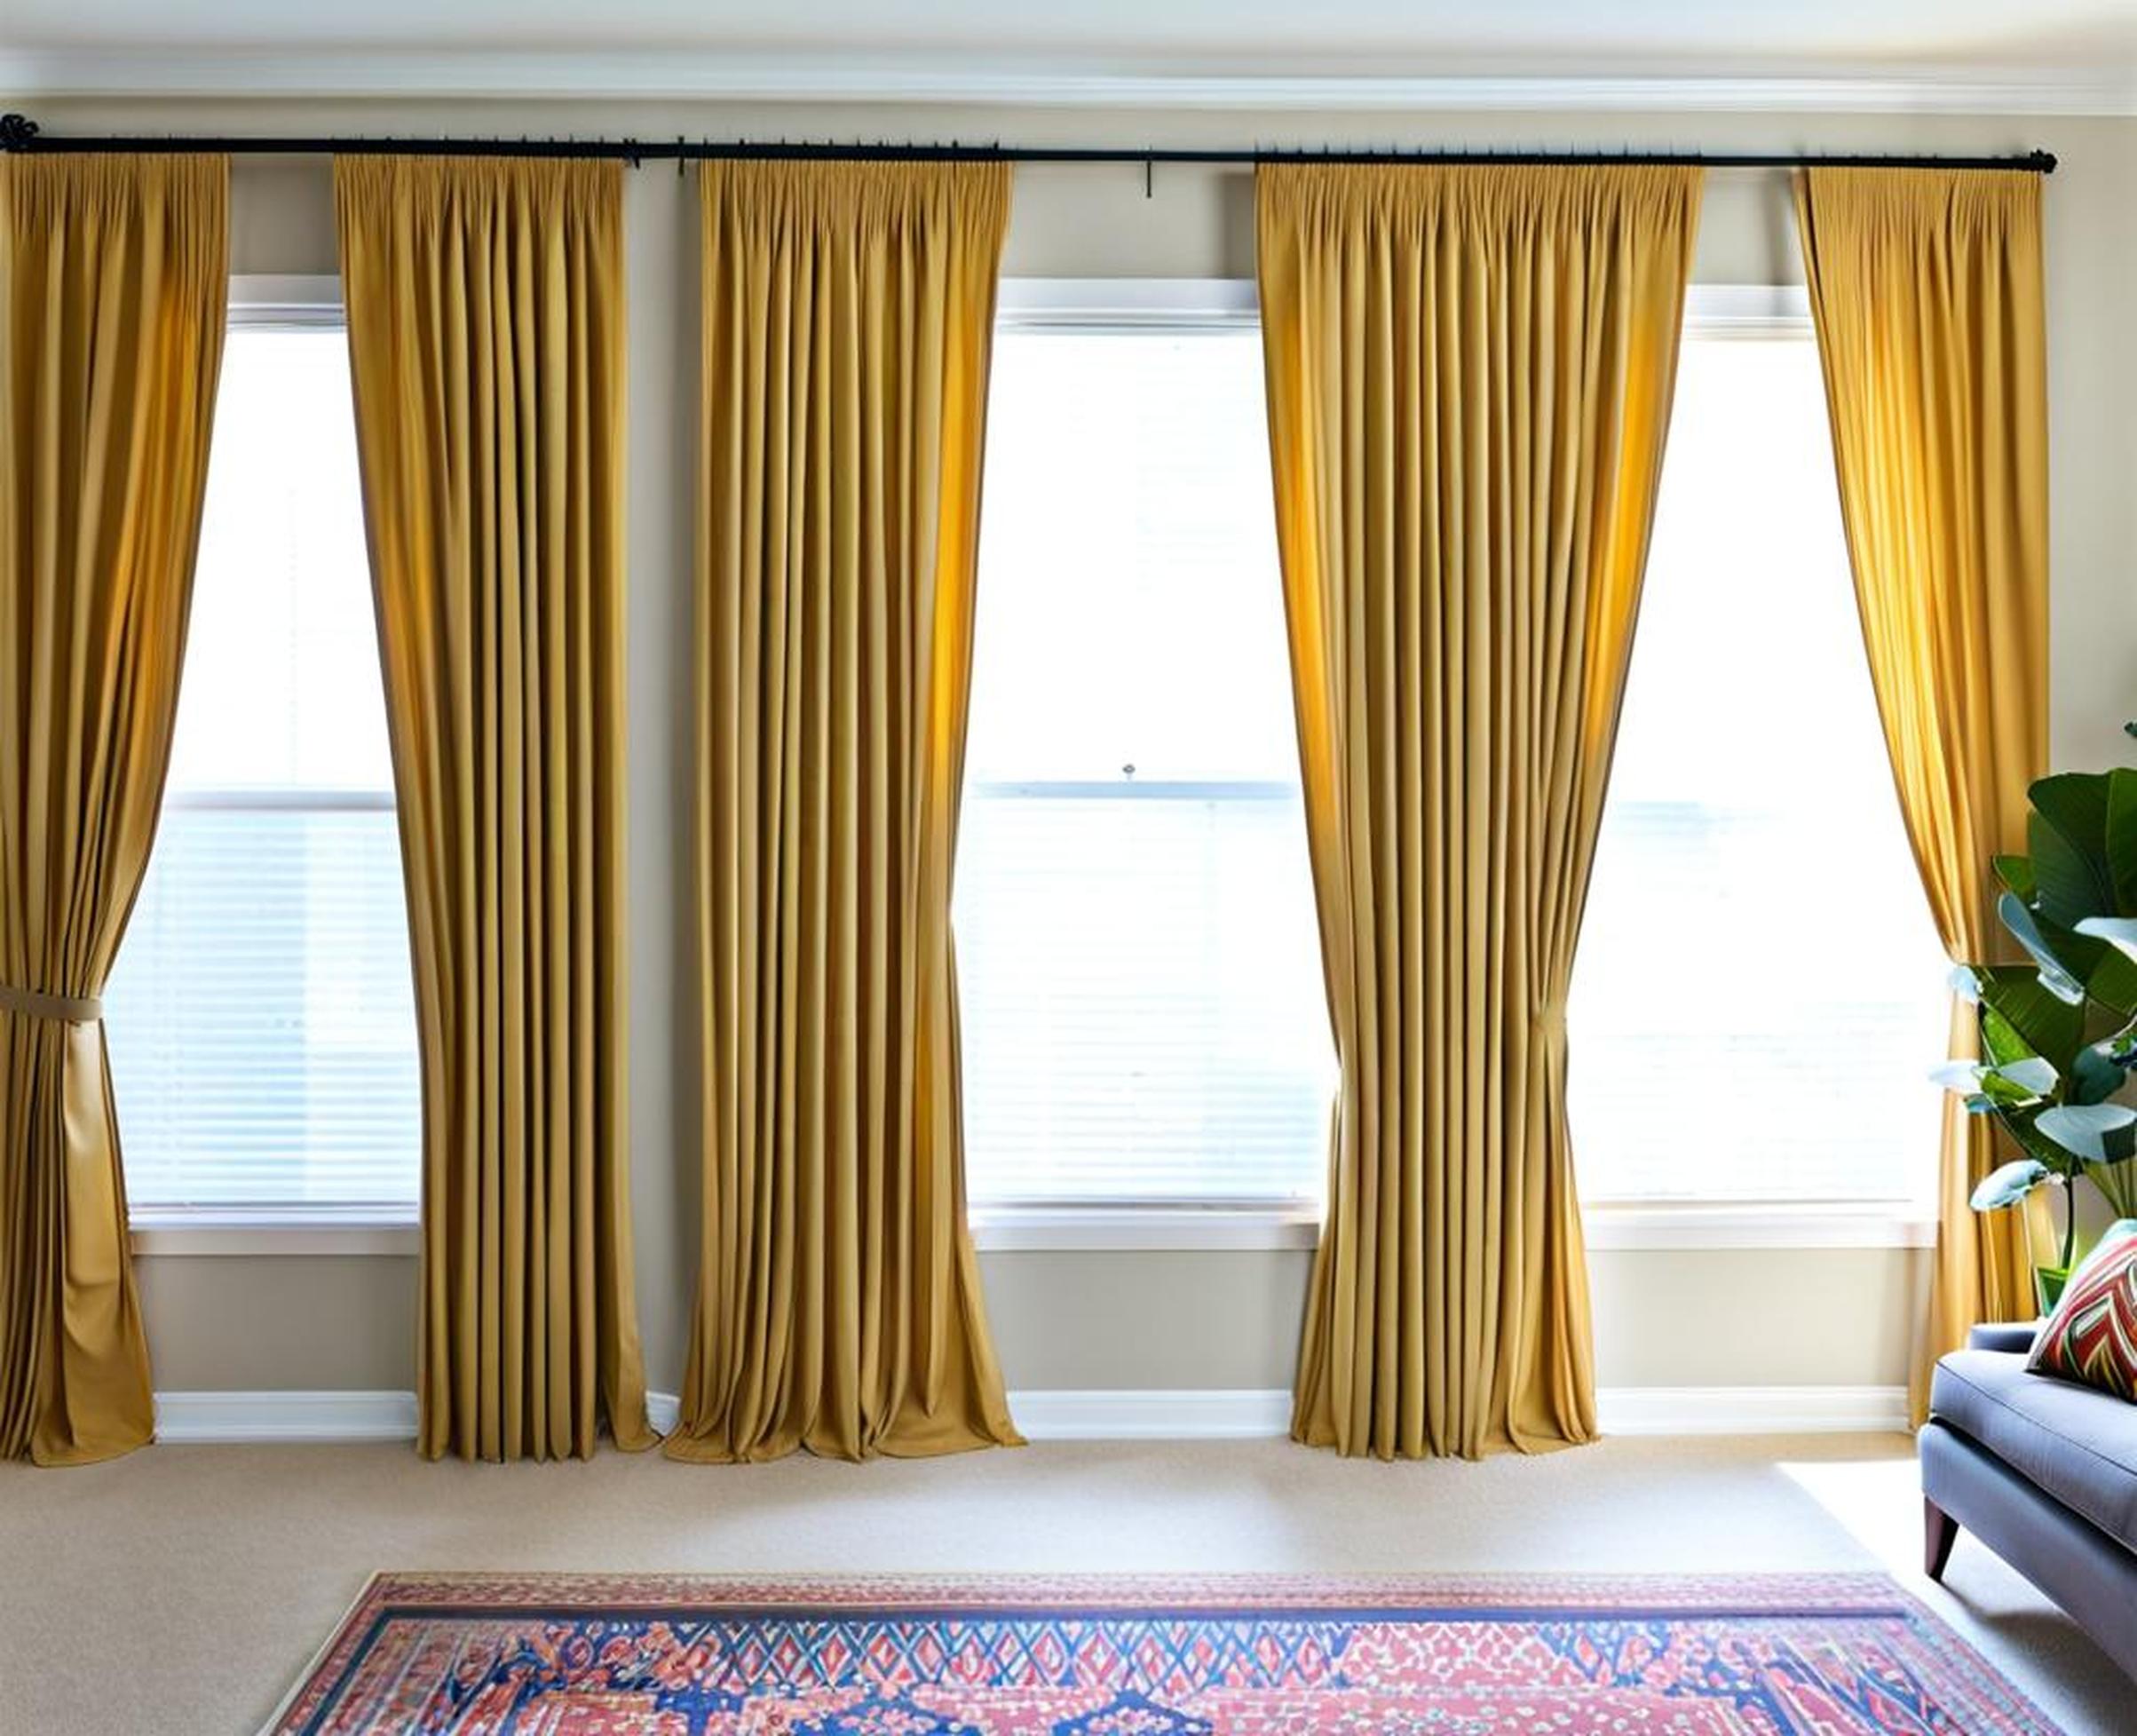 Apartment Dwellers, Instantly Upgrade Your Windows With These Genius Curtain Hacks